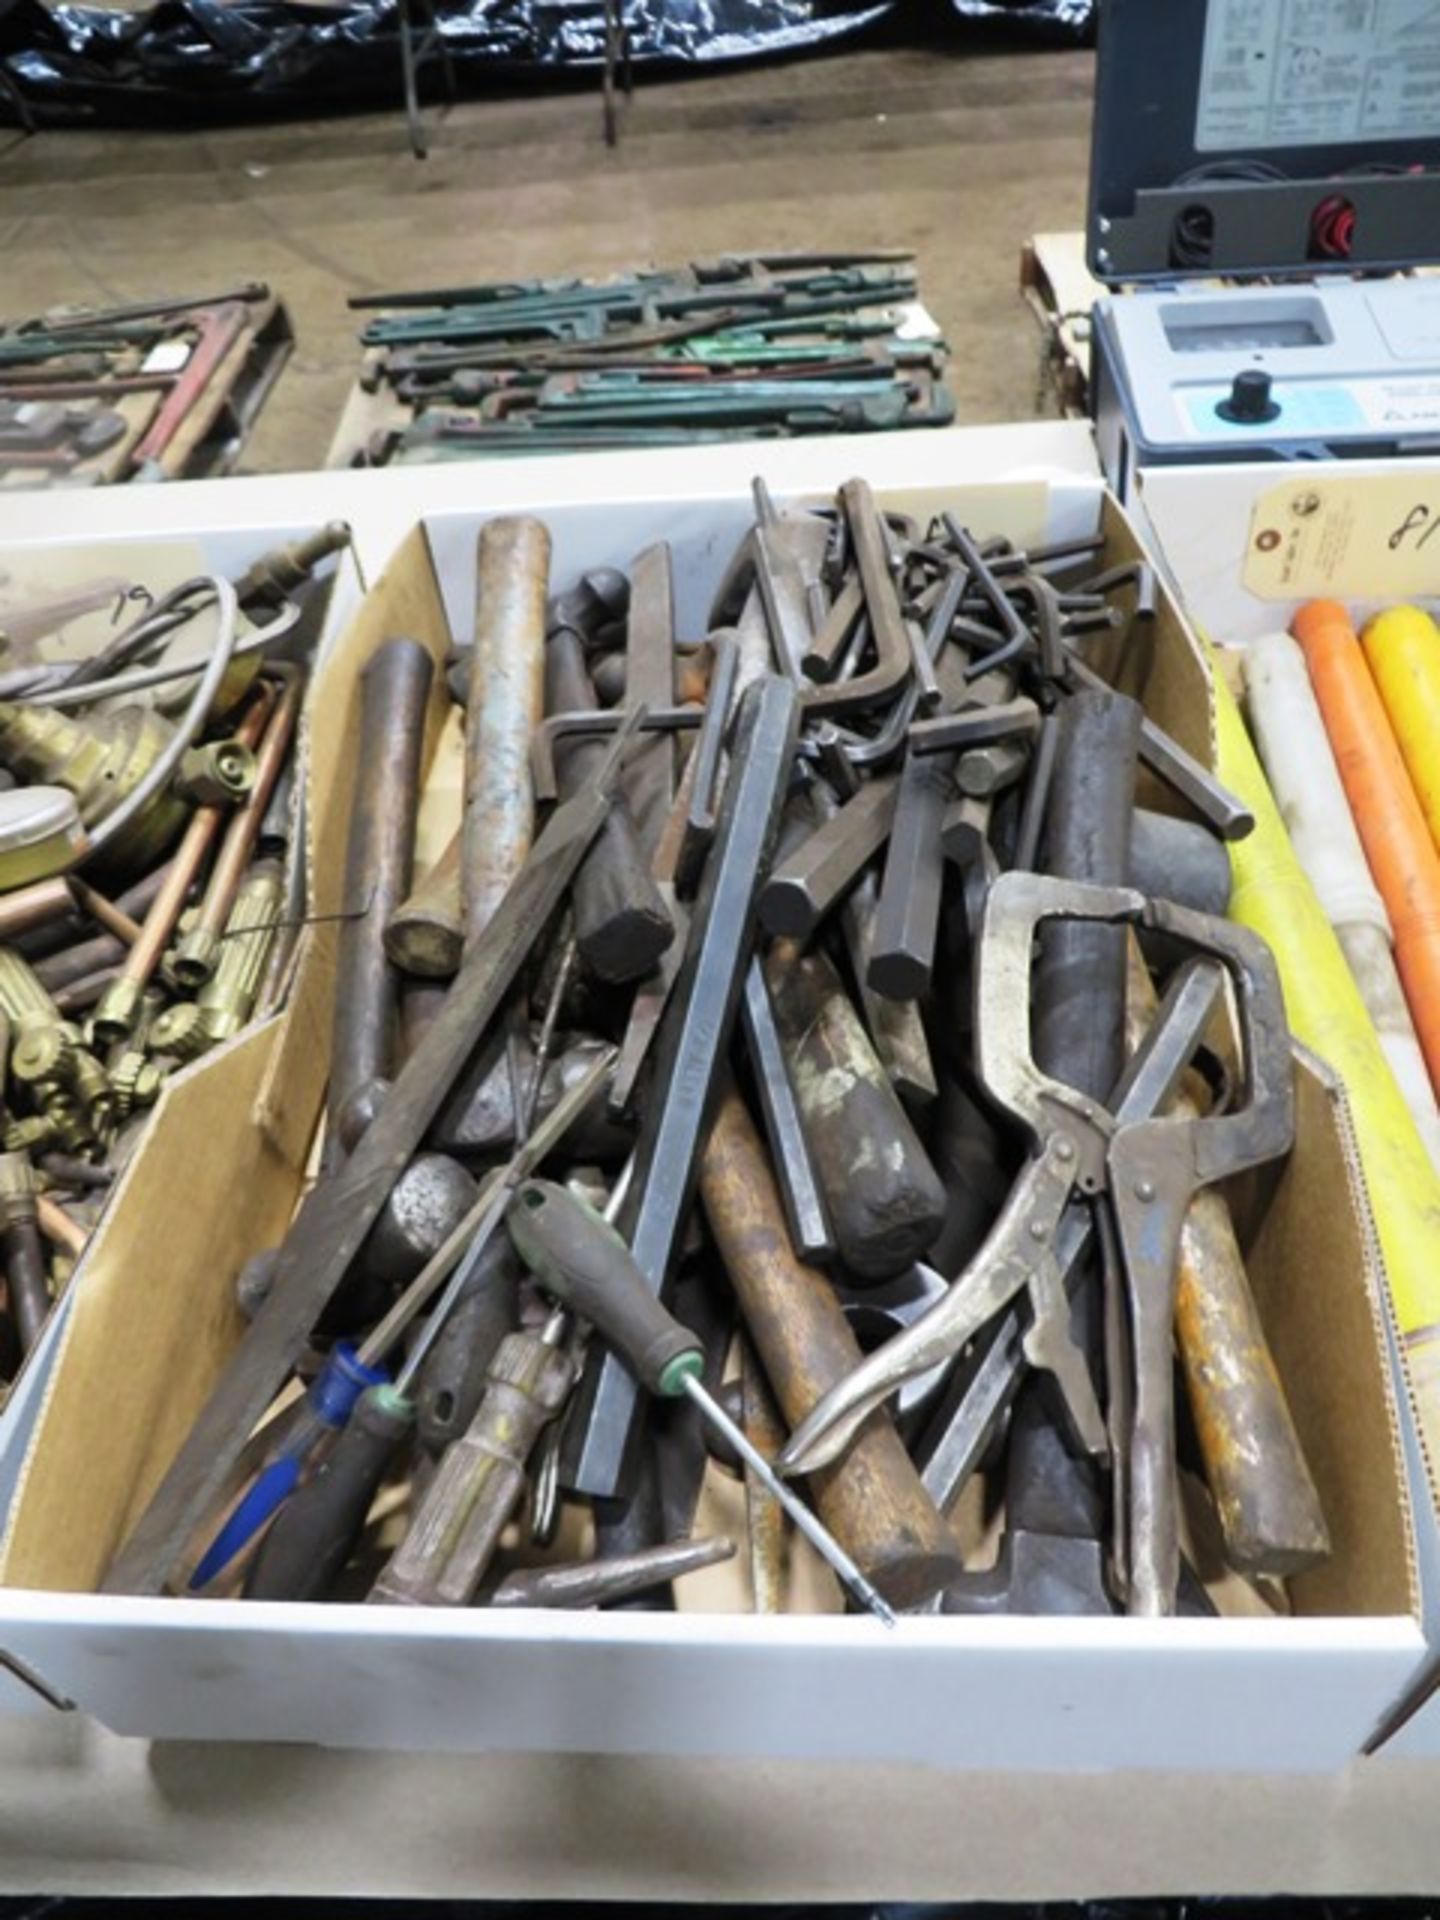 Hammers, Files, Allen Wrenches, Etc.